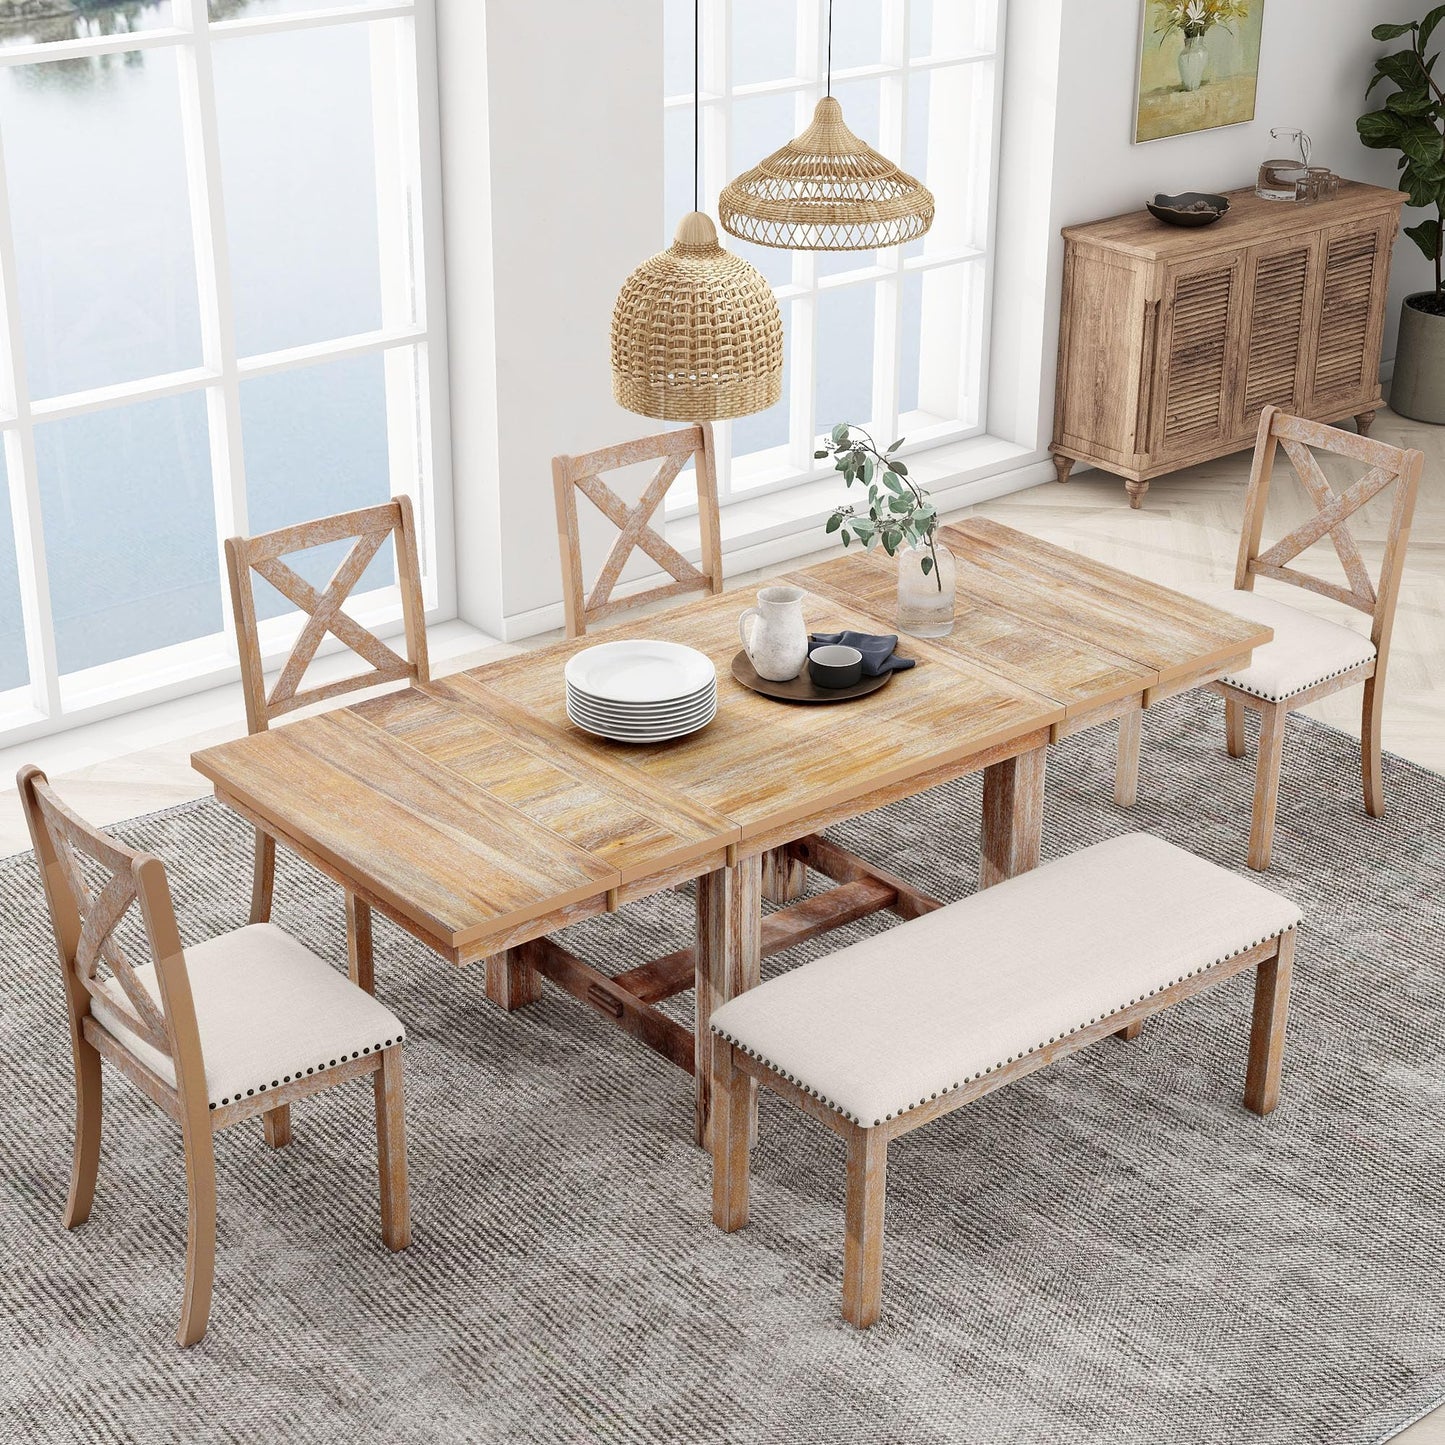 LUMISOL 6 Piece Extendable Dining Table Set for 6-8 Persons Farmhouse Style Solid Wood Kitchen Dining Set 82" Table with 2 11" Removable Leaf 4